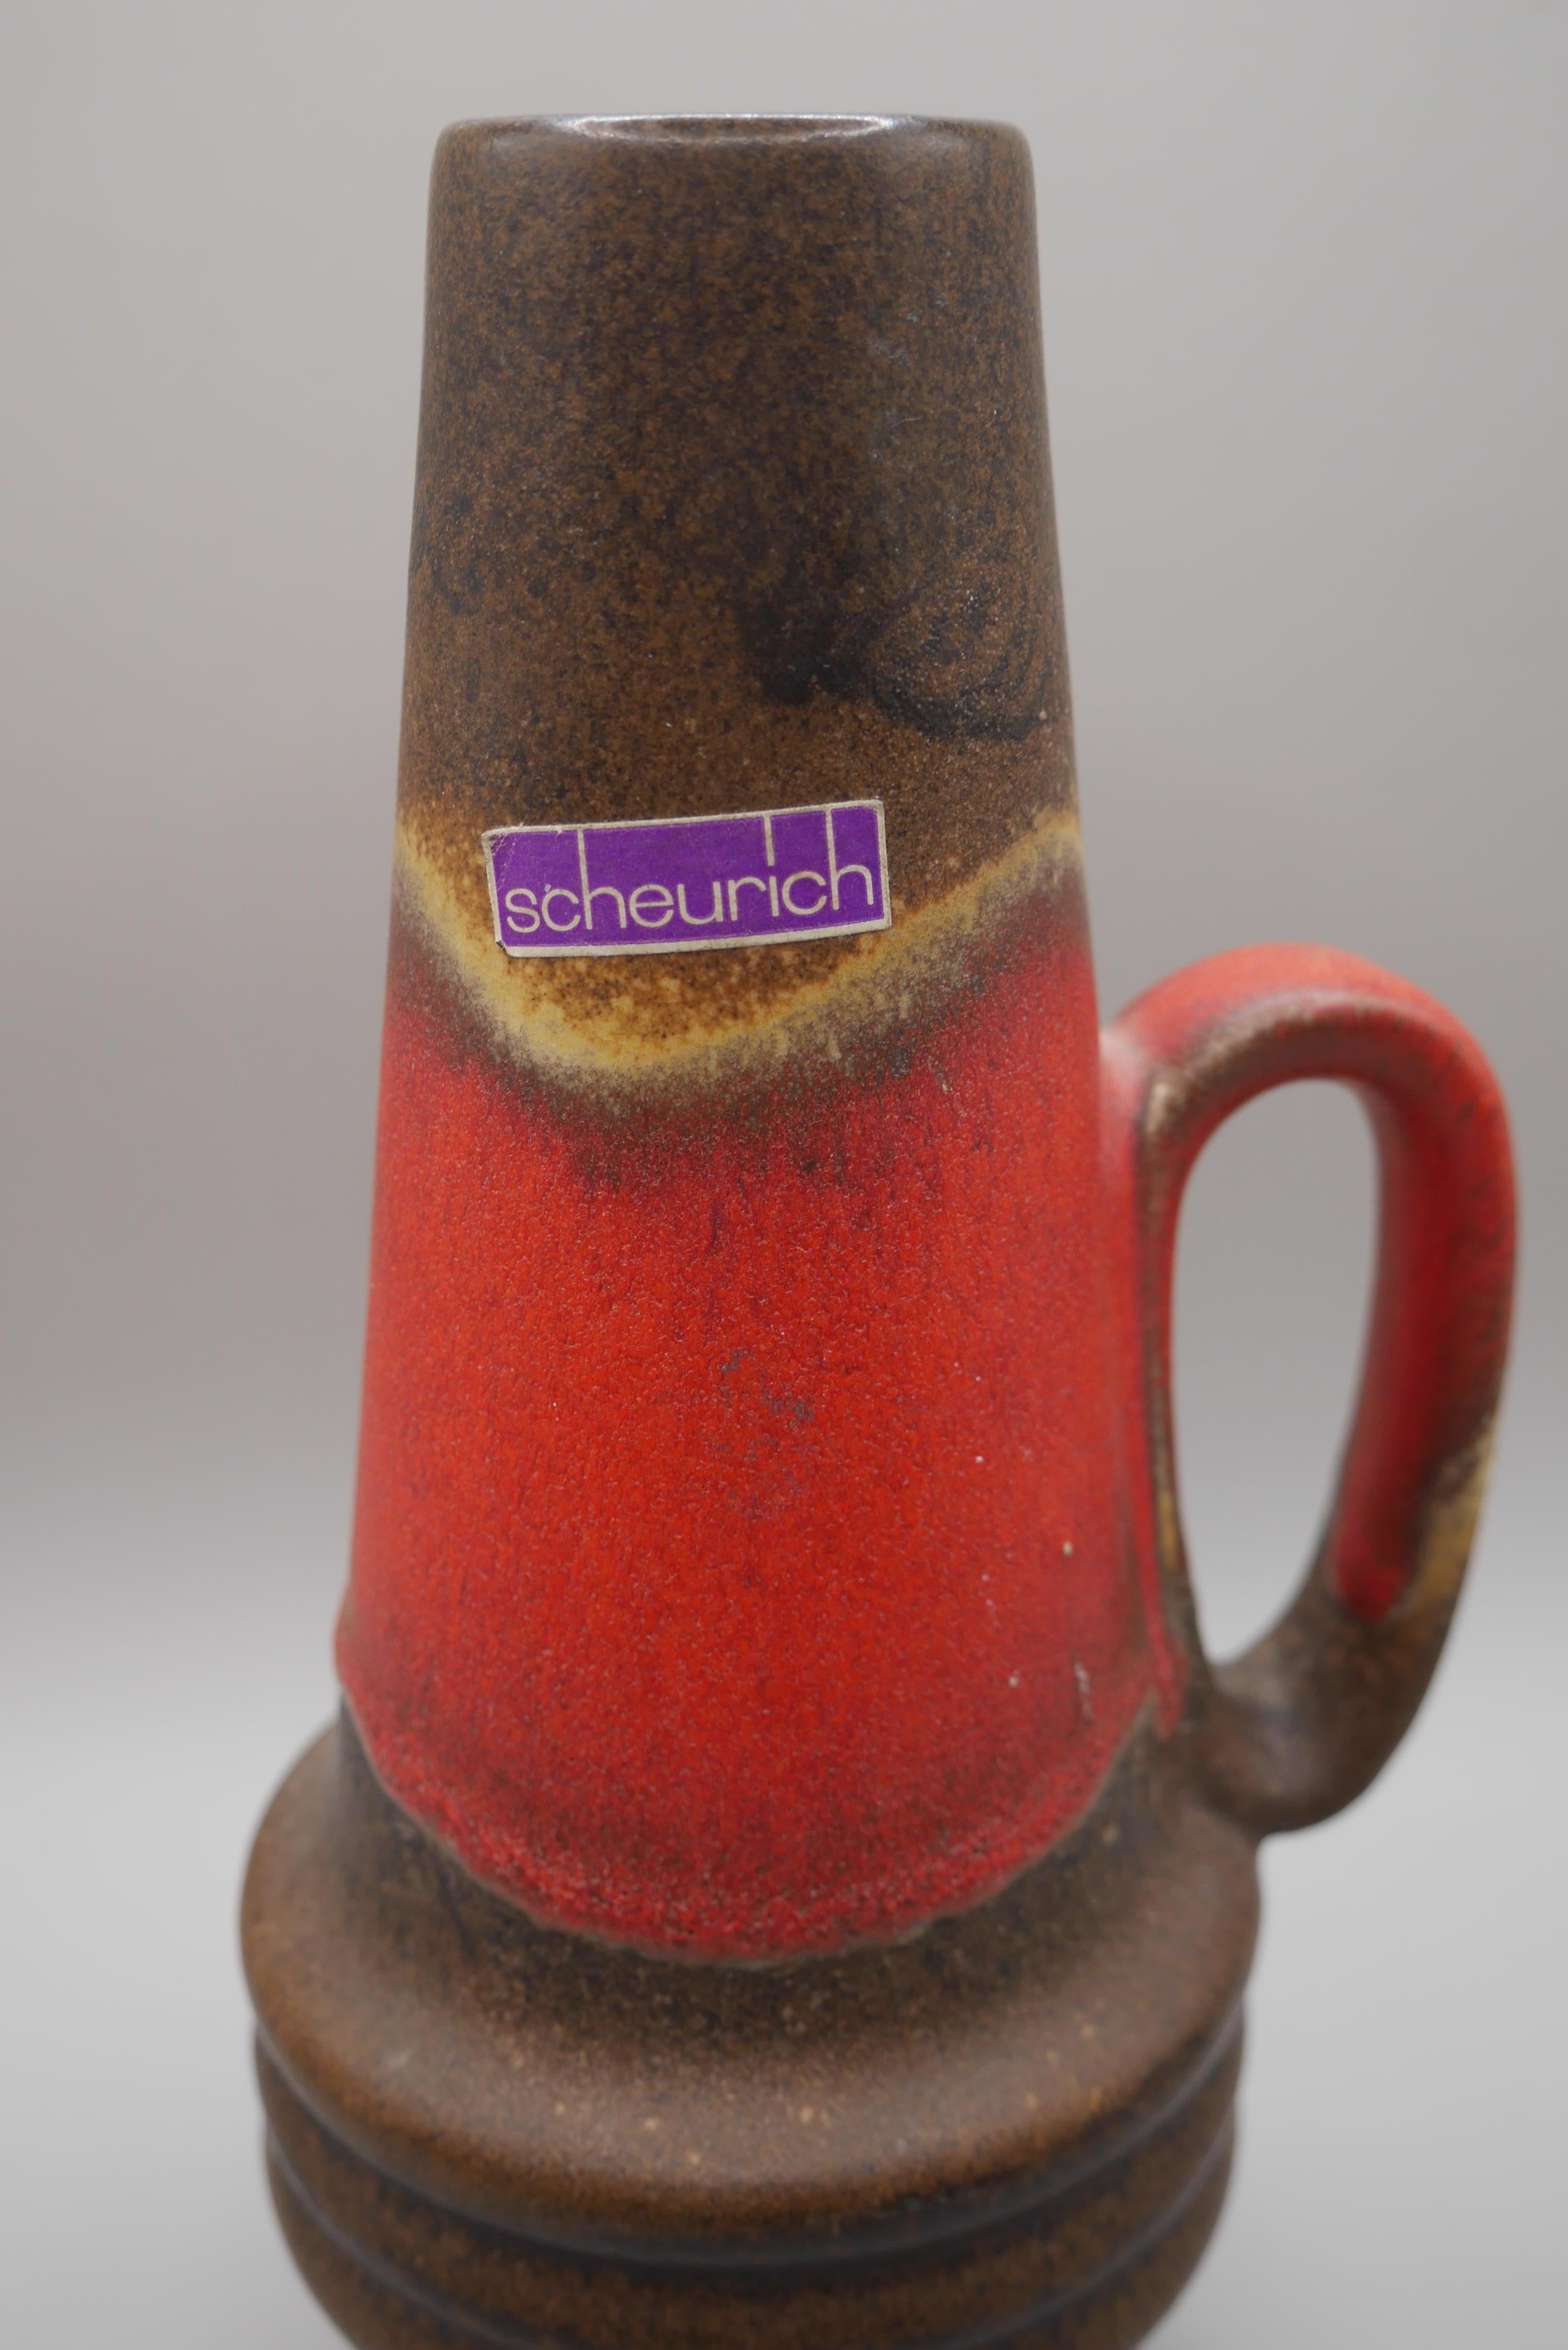 A lovely, handled vase from Scheurich, West Germany with a red and dark brown glaze. 

Alois Scheurich and his cousin Fridolin Greulich started in 1928 a wholesale company in glass, porcelain and ceramics in Schneeberg, Germany. In 1948 they